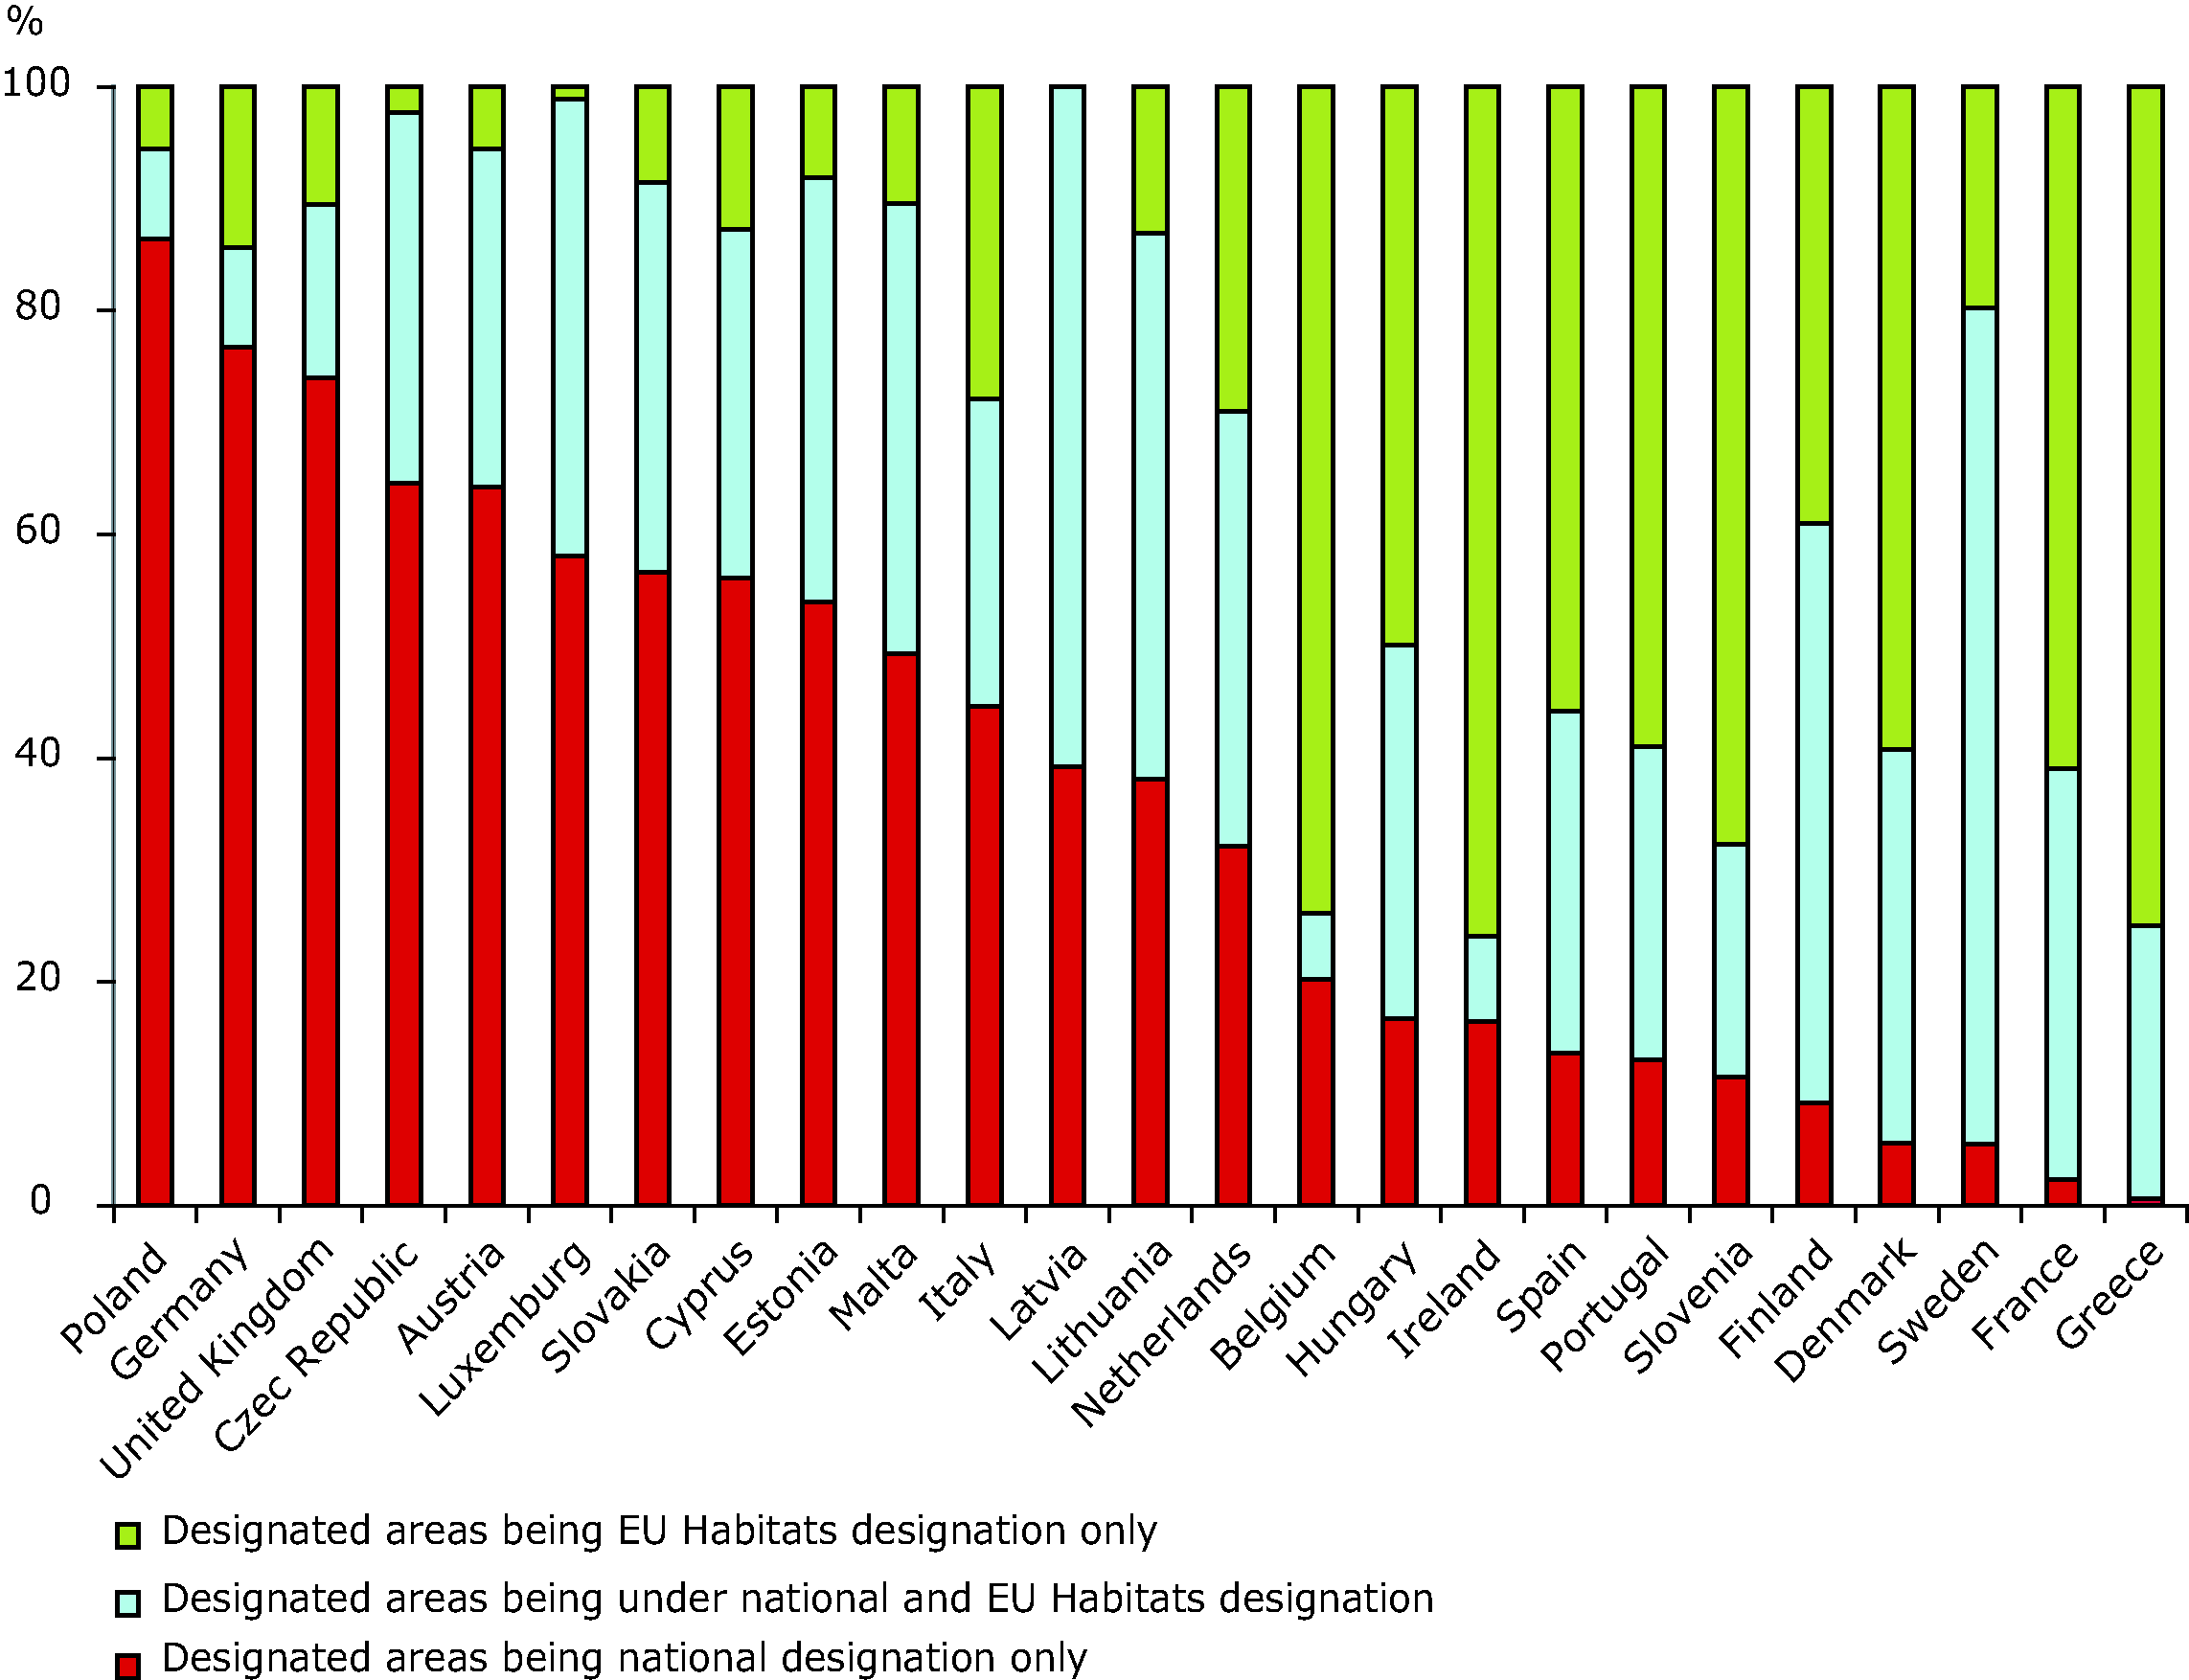 Share of designated areas per country in the following categories: only under national designation, only under EU Habitats Directive designation and both at national and EU Habitats Directive designation